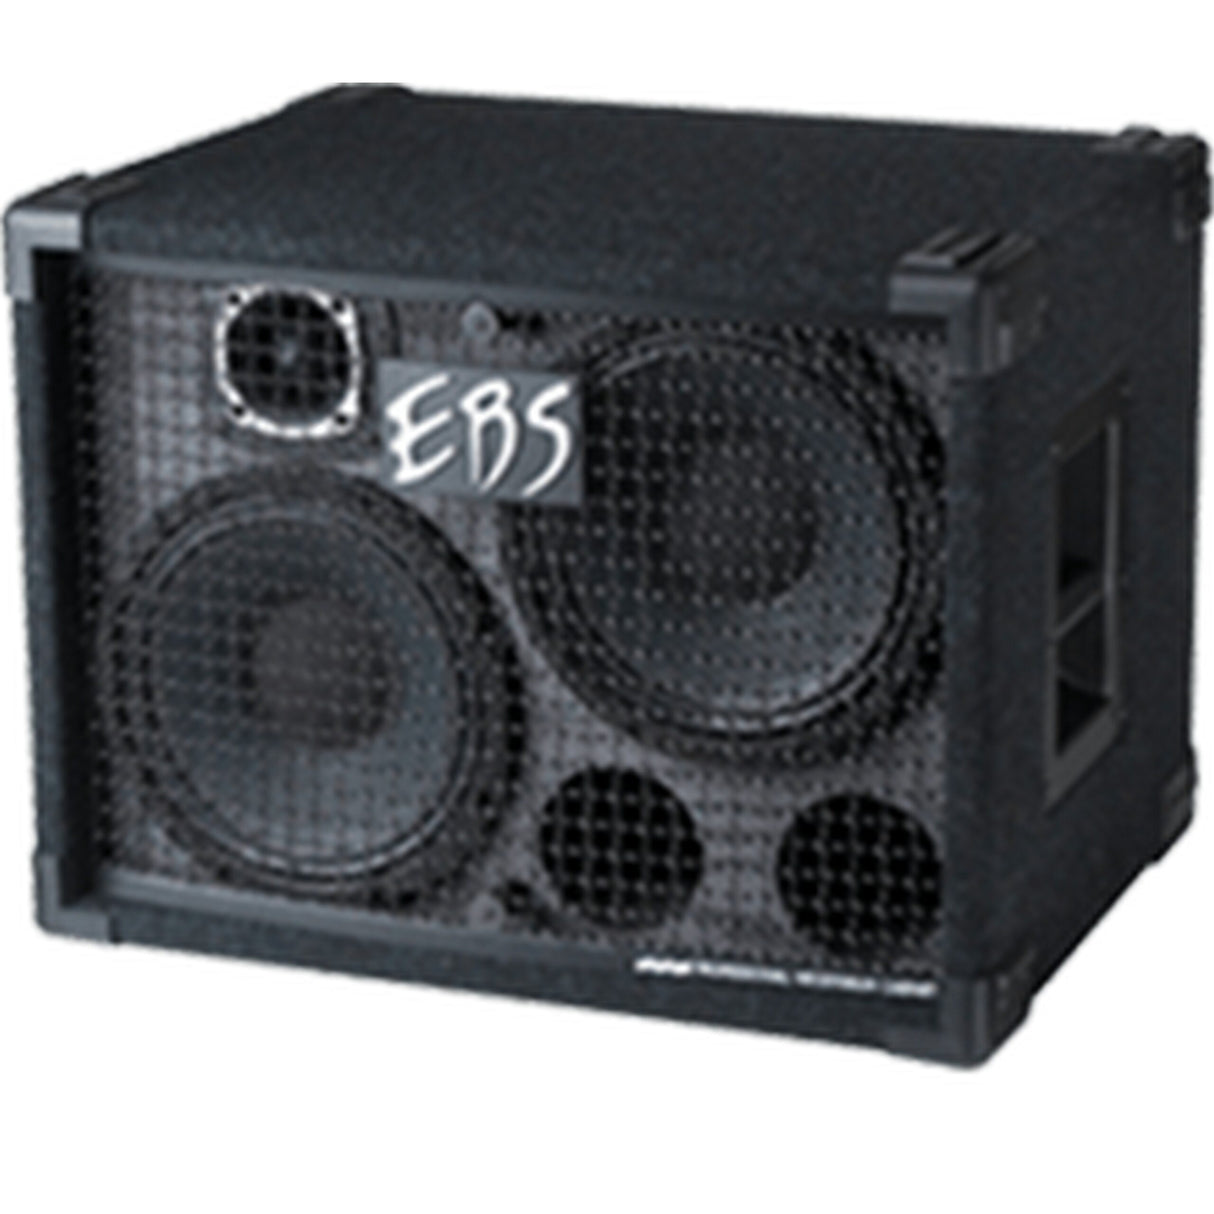 EBS NeoLine 210 Bass Cabinet, 2 x 10 Inch